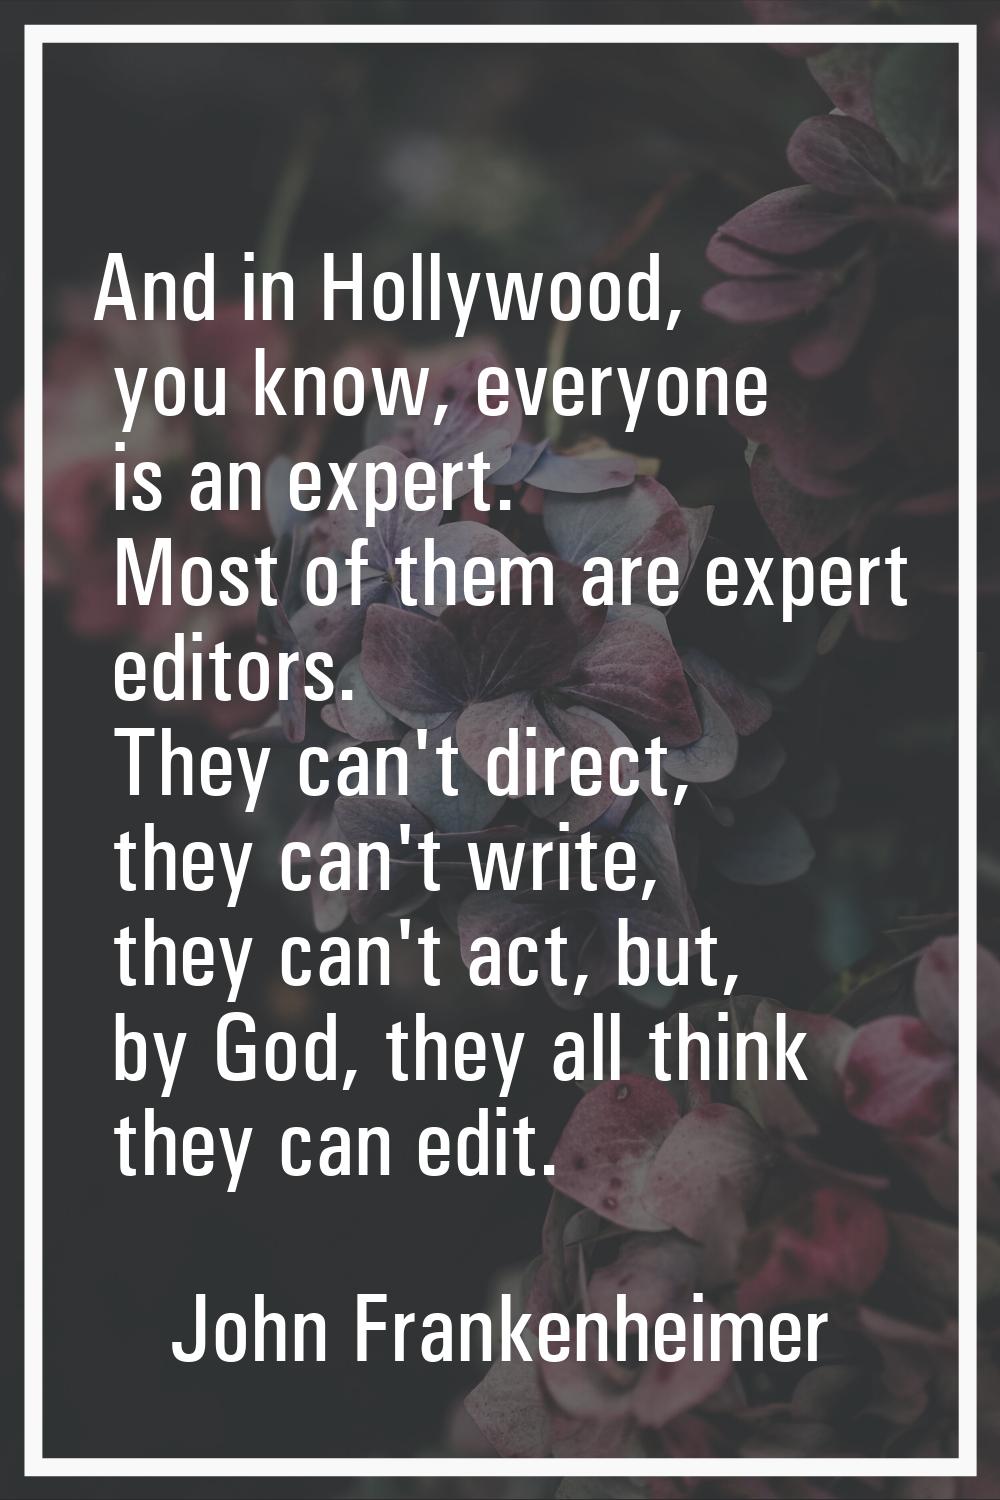 And in Hollywood, you know, everyone is an expert. Most of them are expert editors. They can't dire